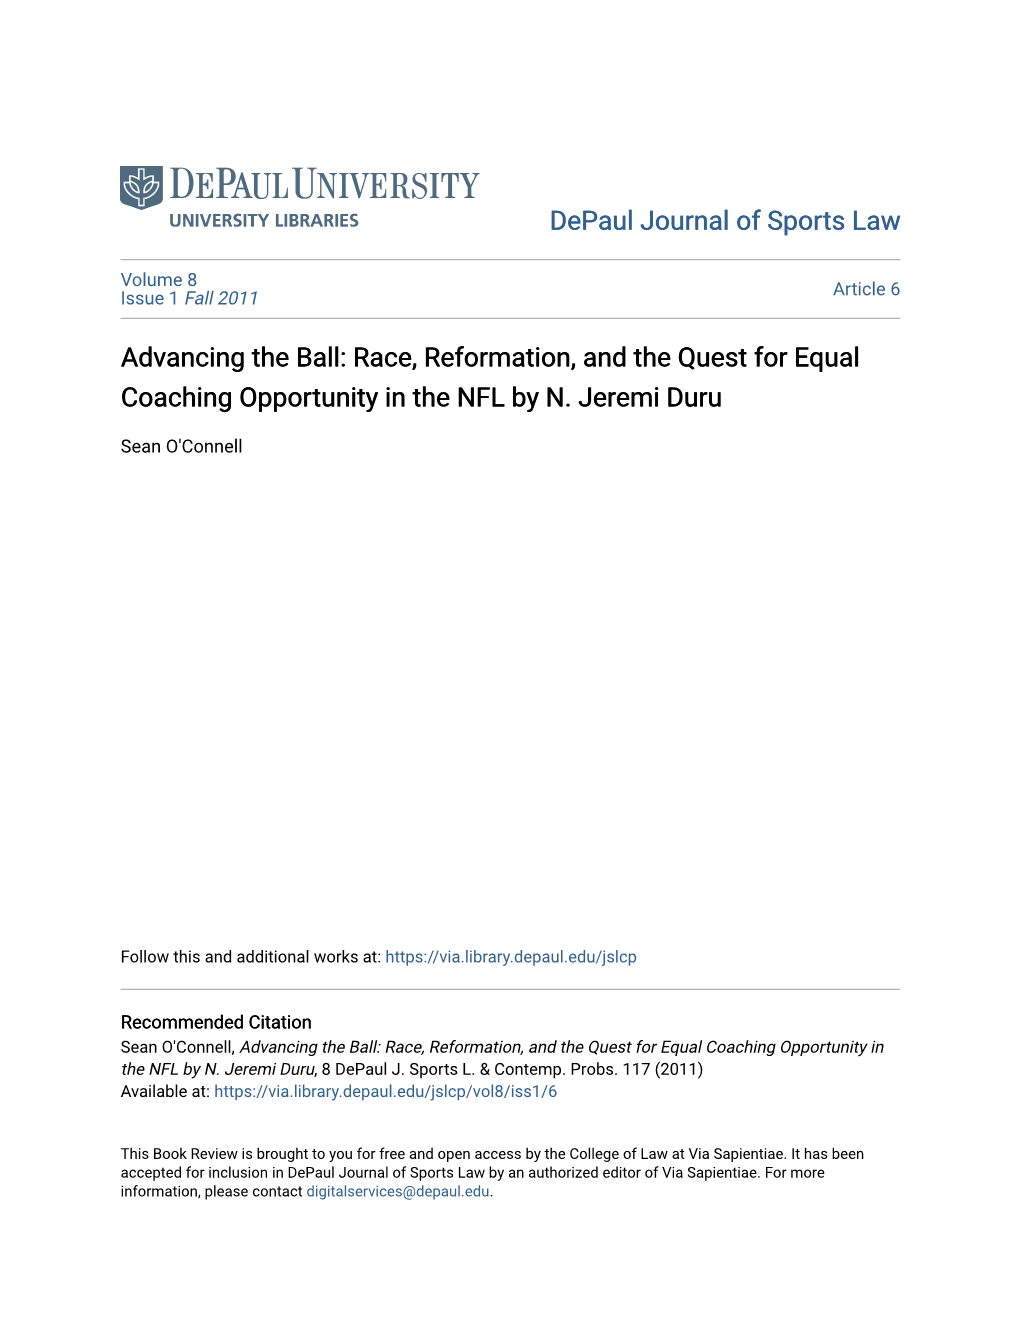 Race, Reformation, and the Quest for Equal Coaching Opportunity in the NFL by N